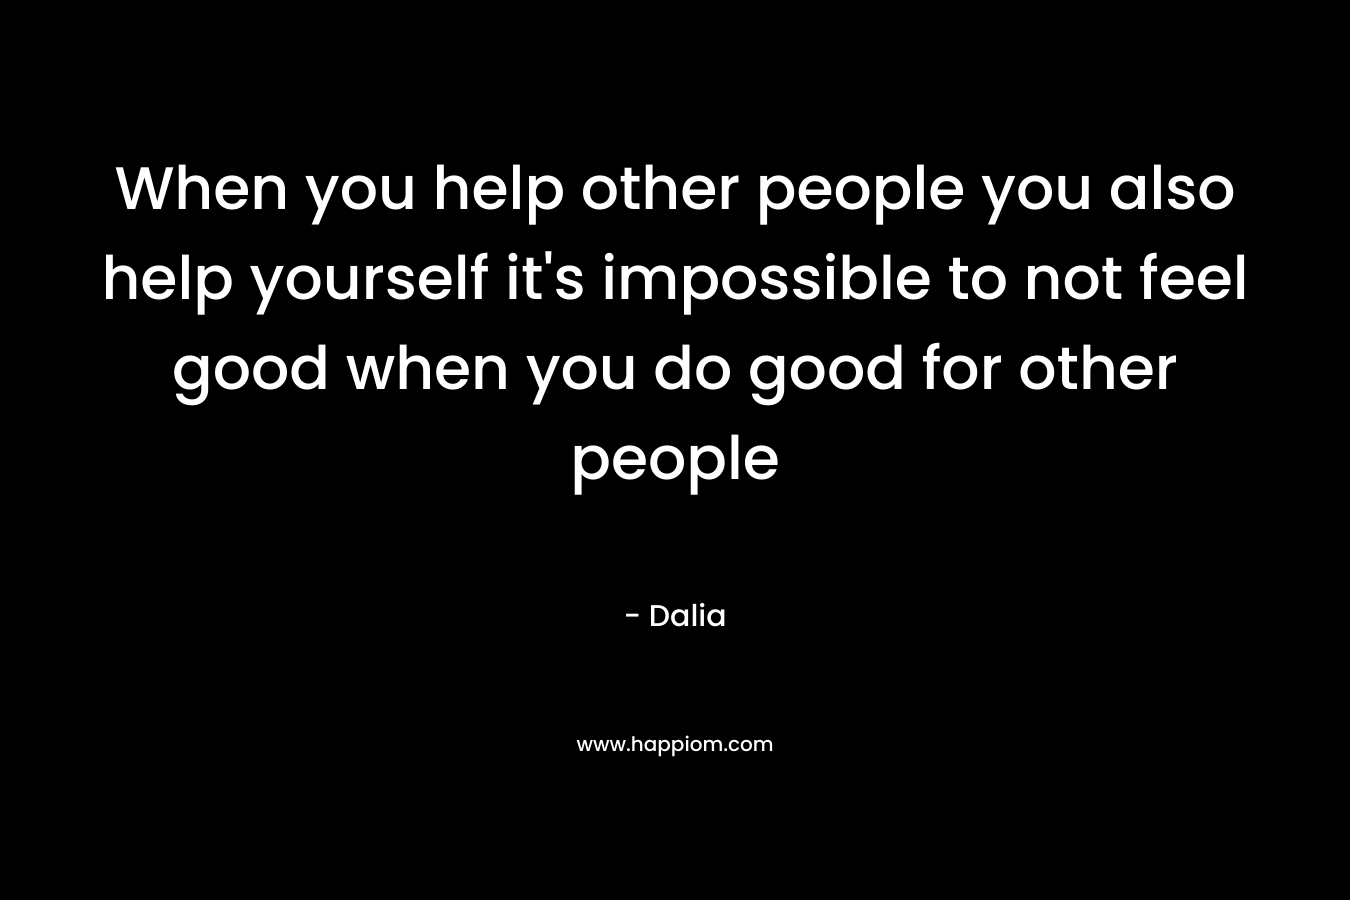 When you help other people you also help yourself it’s impossible to not feel good when you do good for other people – Dalia